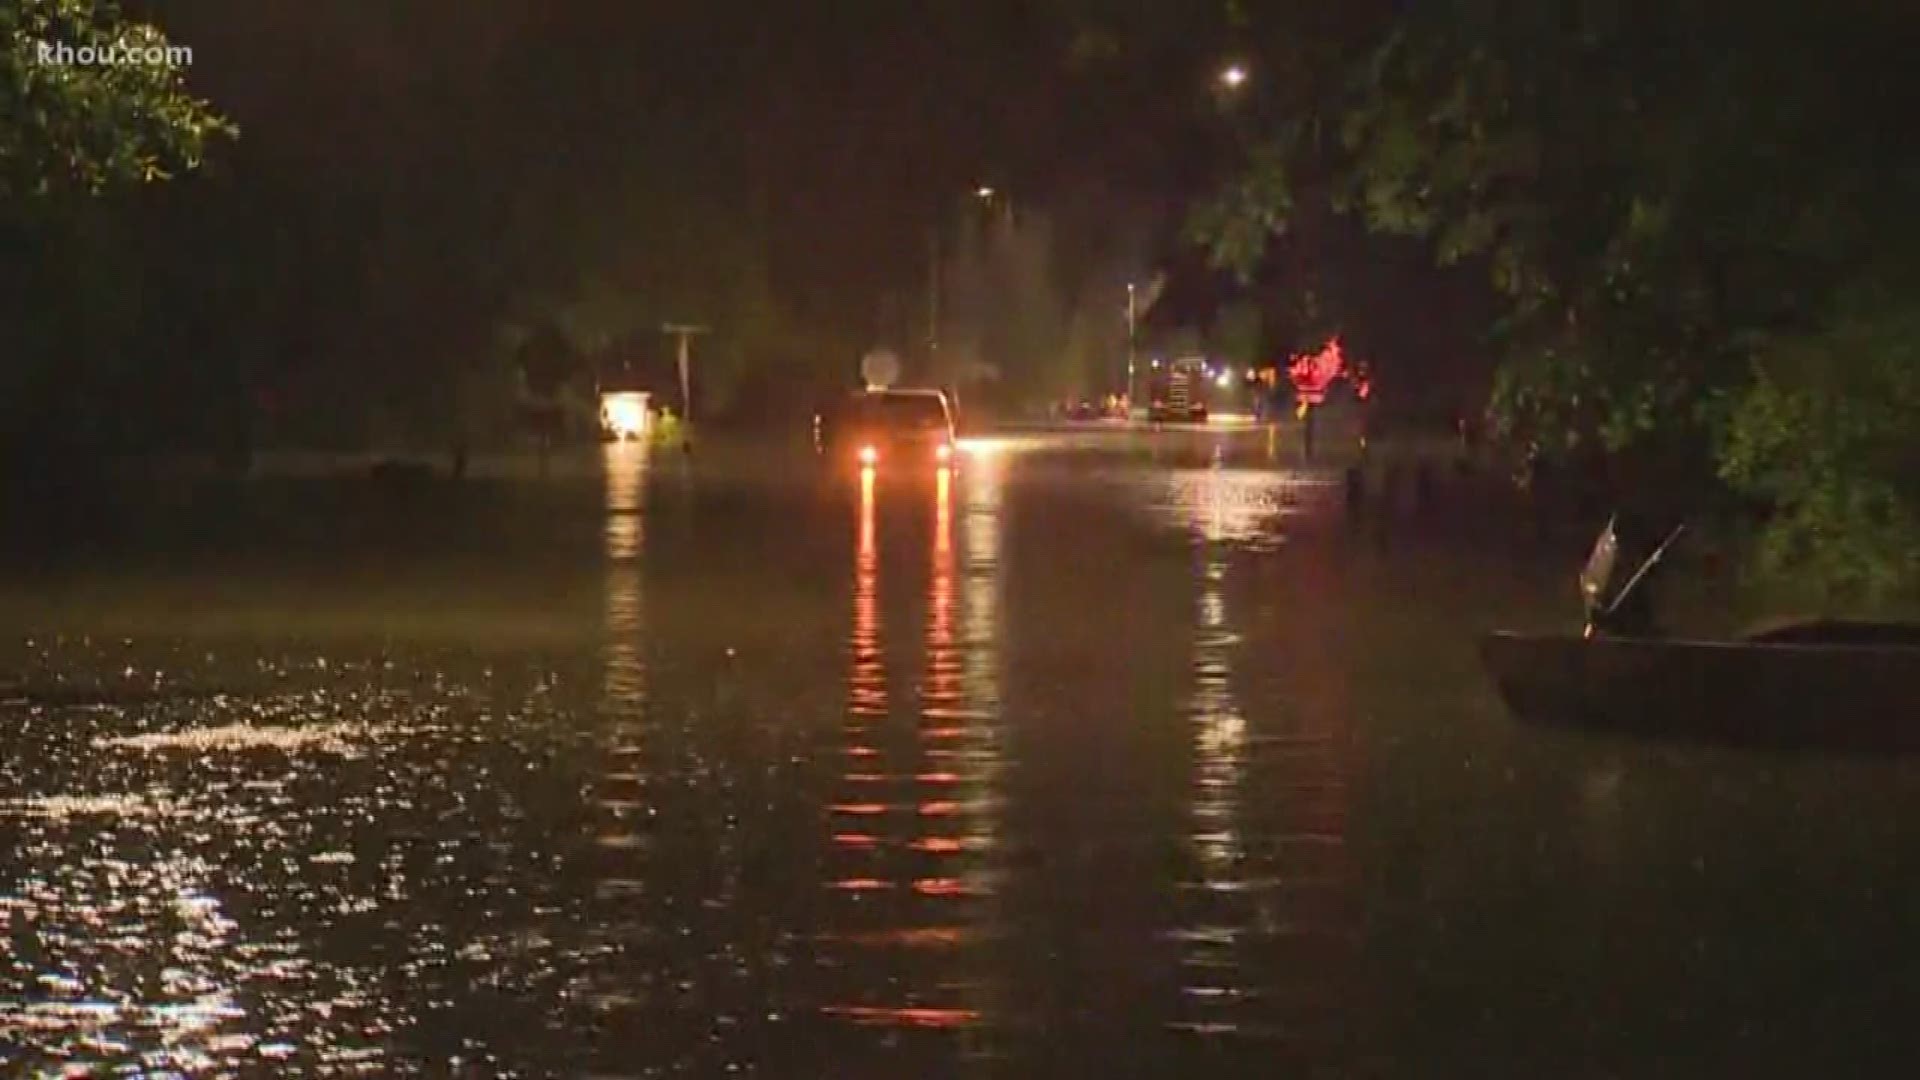 Houston firefighters said more than 400 homes flooded in Kingwood Tuesday. Several people had to be rescued by boat. Many students and teachers were stranded at their schools because of flooded streets.